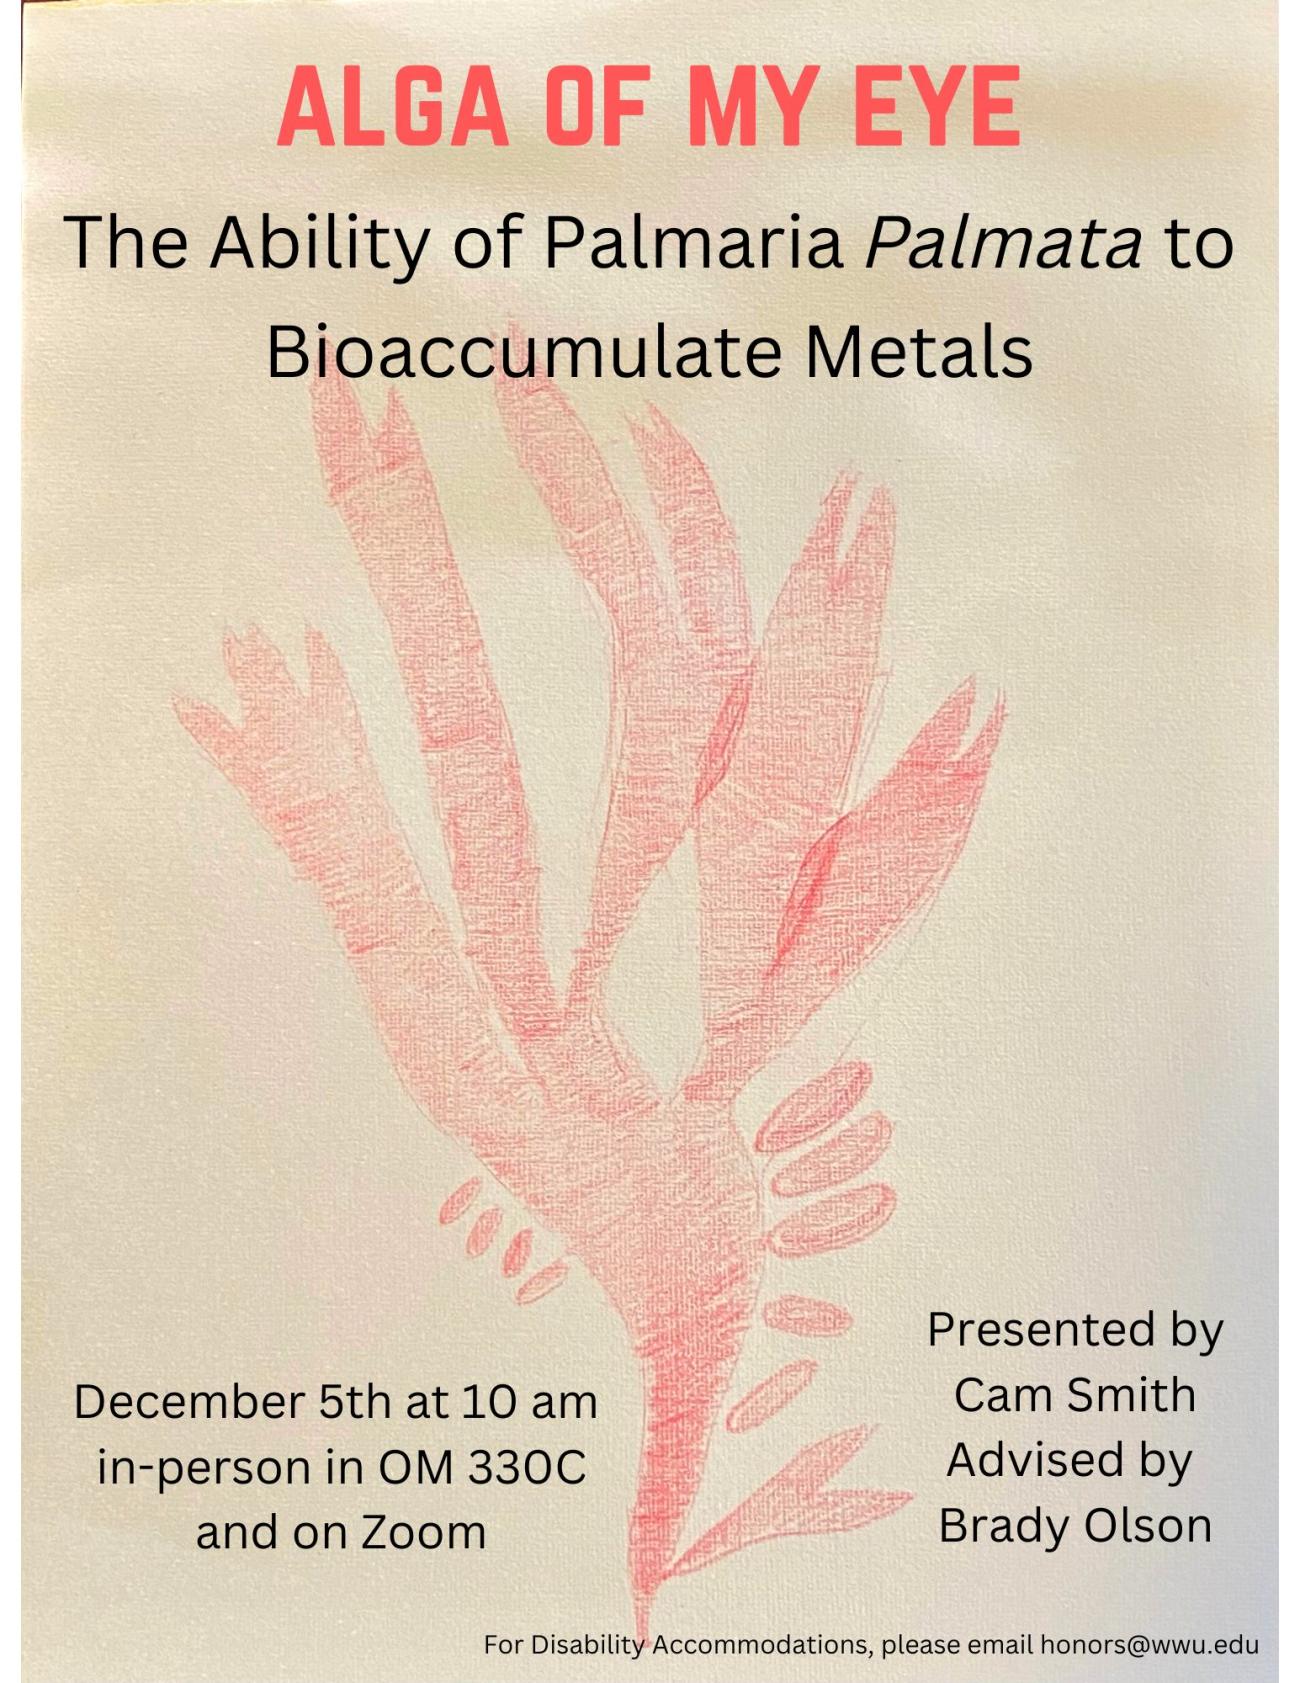 A tan poster with a red colored pencil shape drawing in the background. The text reads: "Alga of my Eye, The ability of Palmaria Palmata to Bioaccumulate Metals. December 5th at 10 am, in-person in OM330C and on Zoom. Presented by Cam Smith, Advised by Brady Olson. For Disability Accommodations, please email honors@wwu.edu."